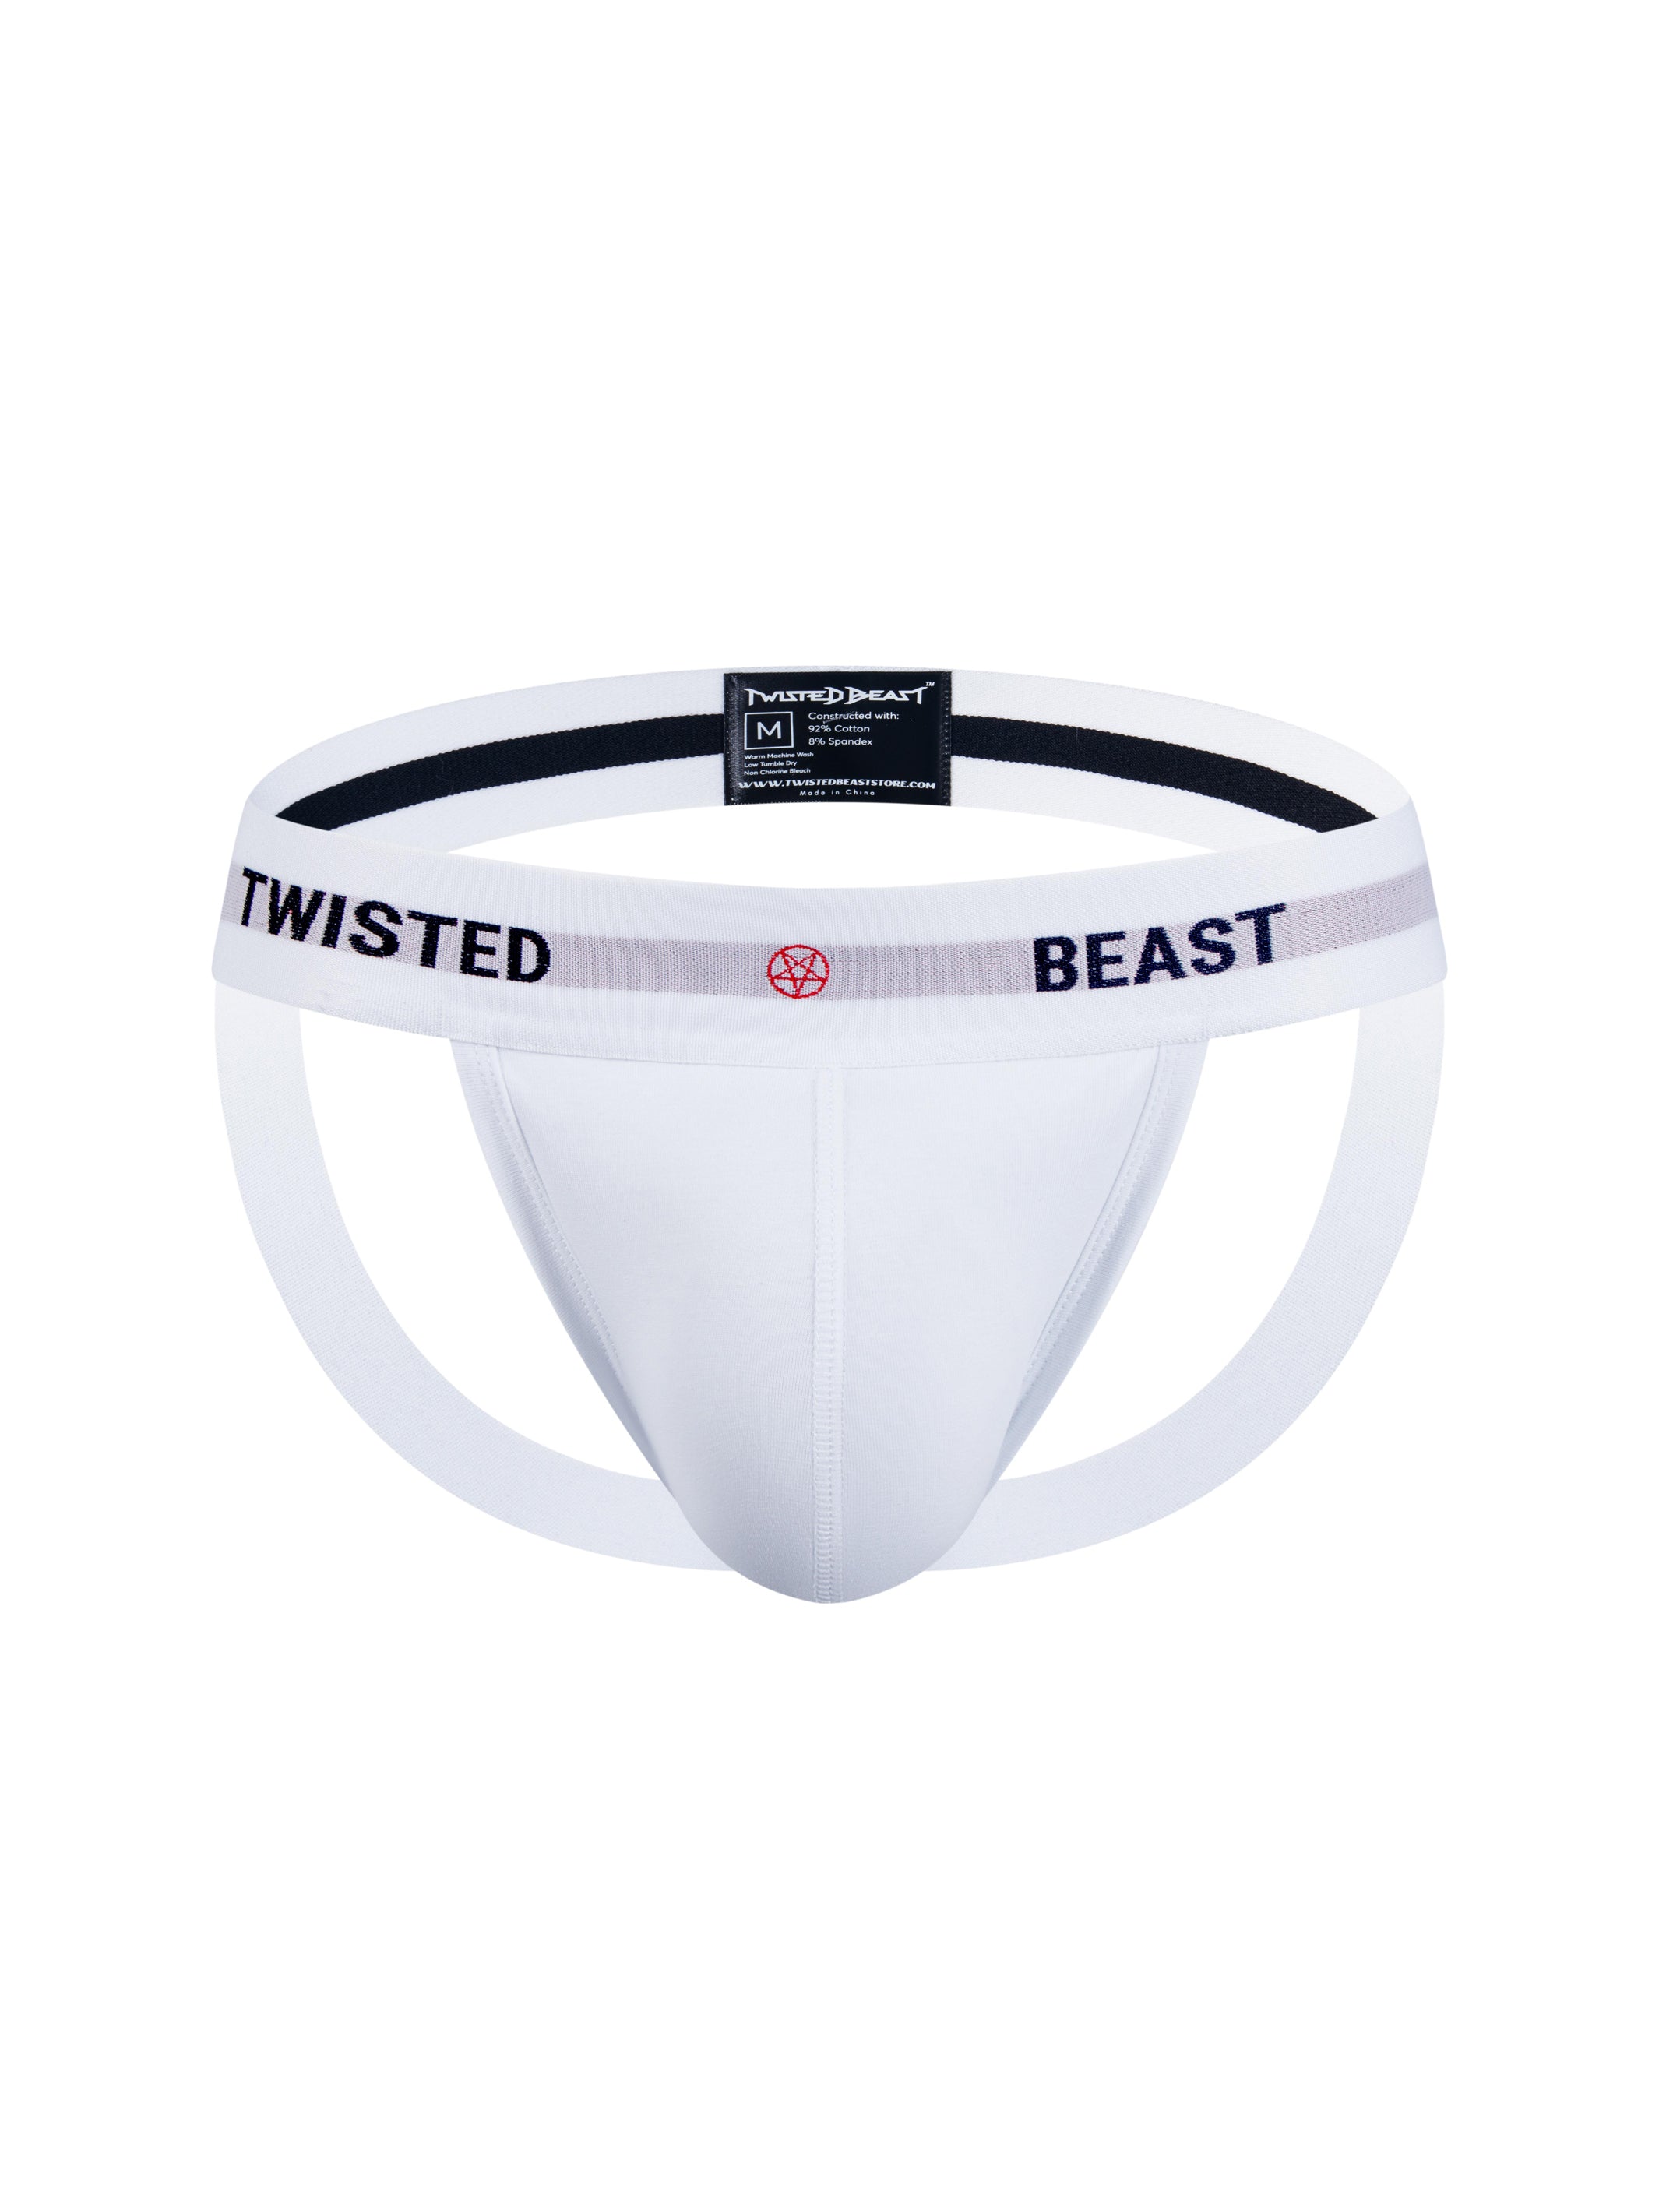 A front product photo of a white Insignia Jock by Twisted Beast.